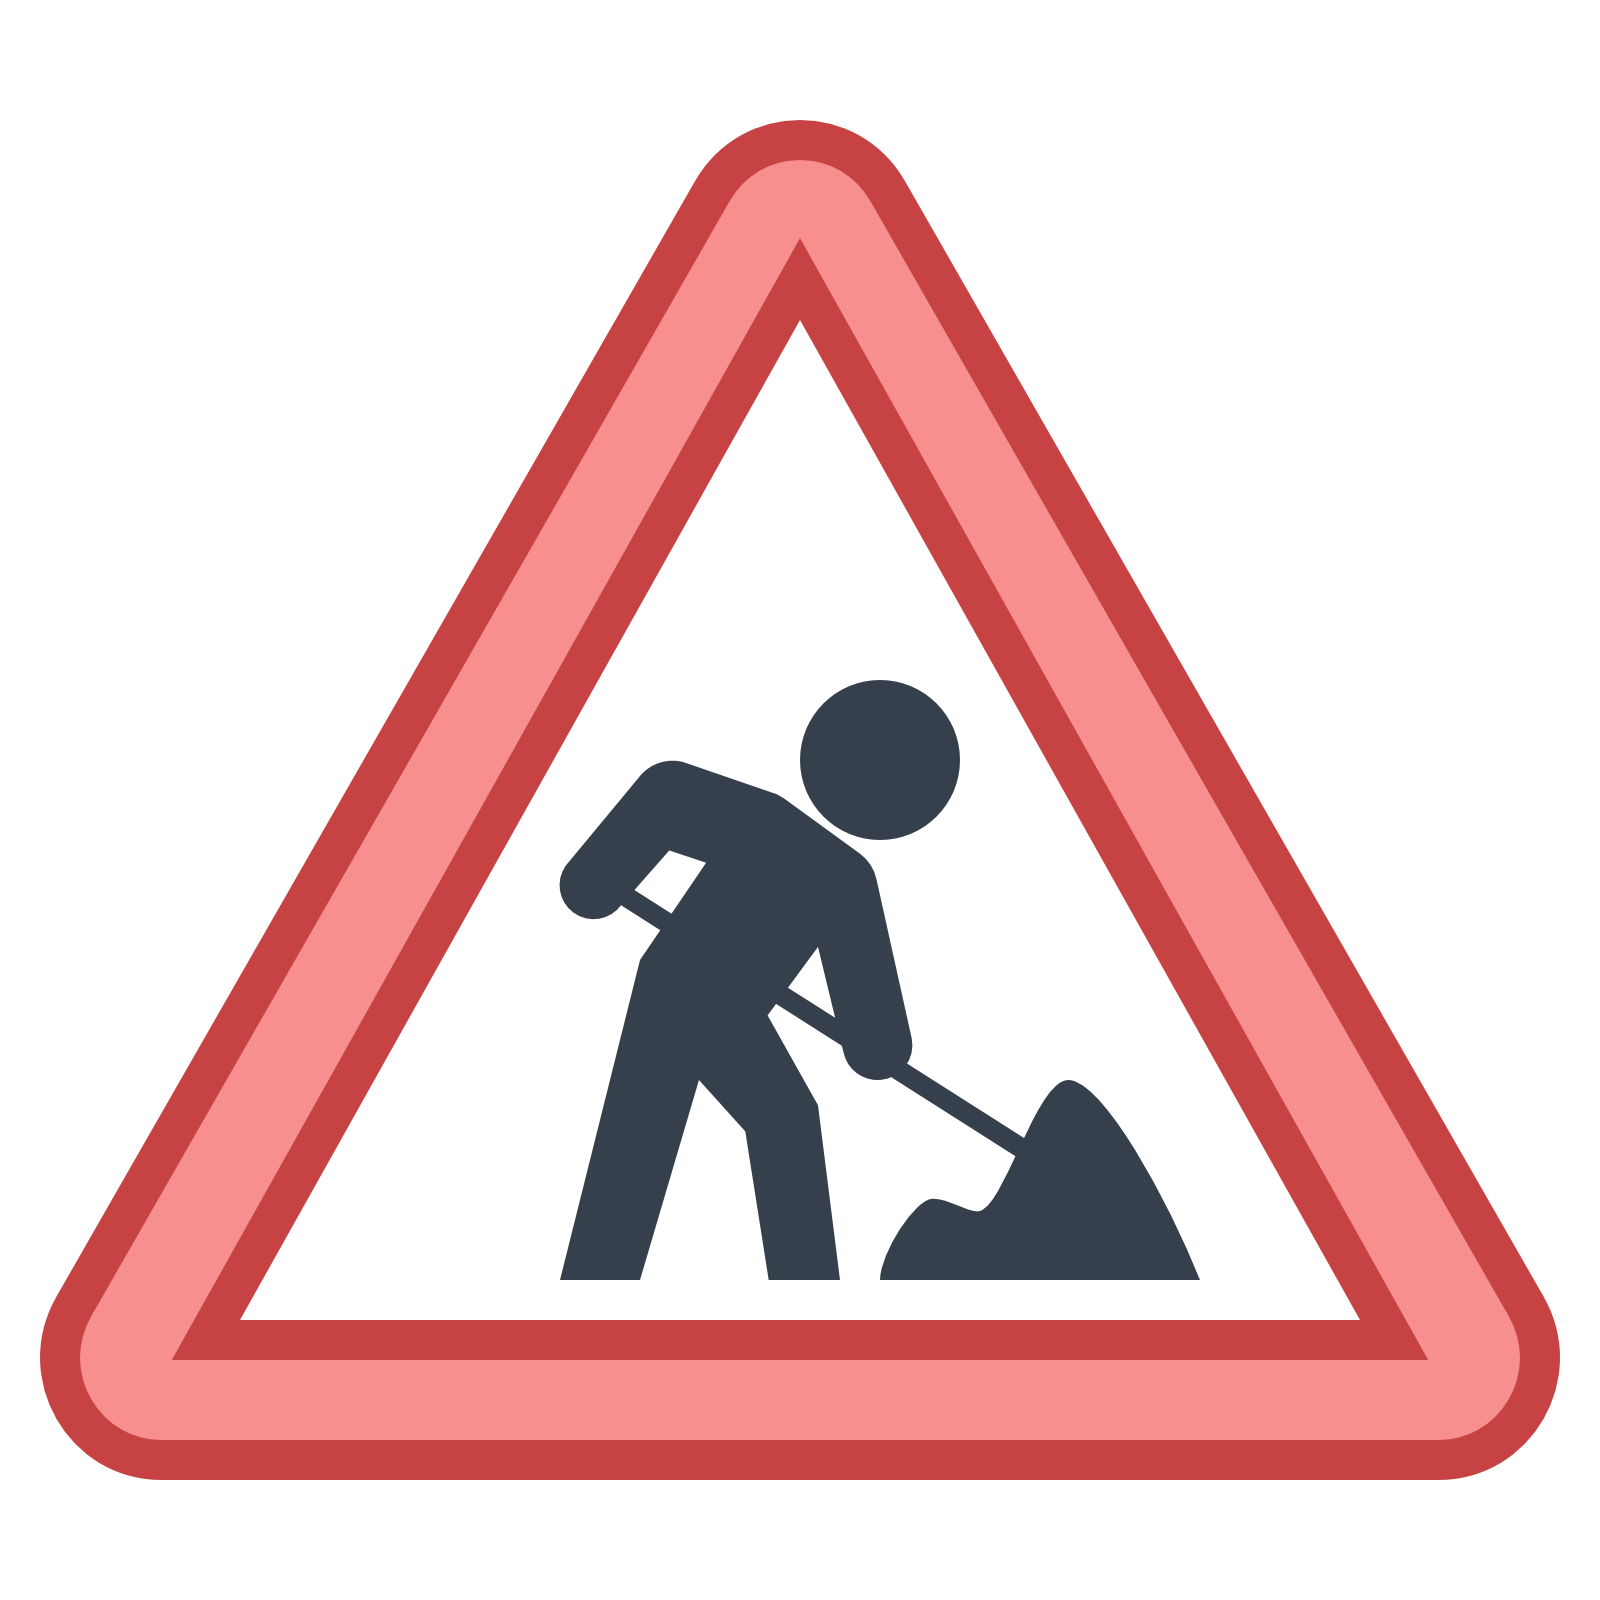 under construction icon download icons #29027